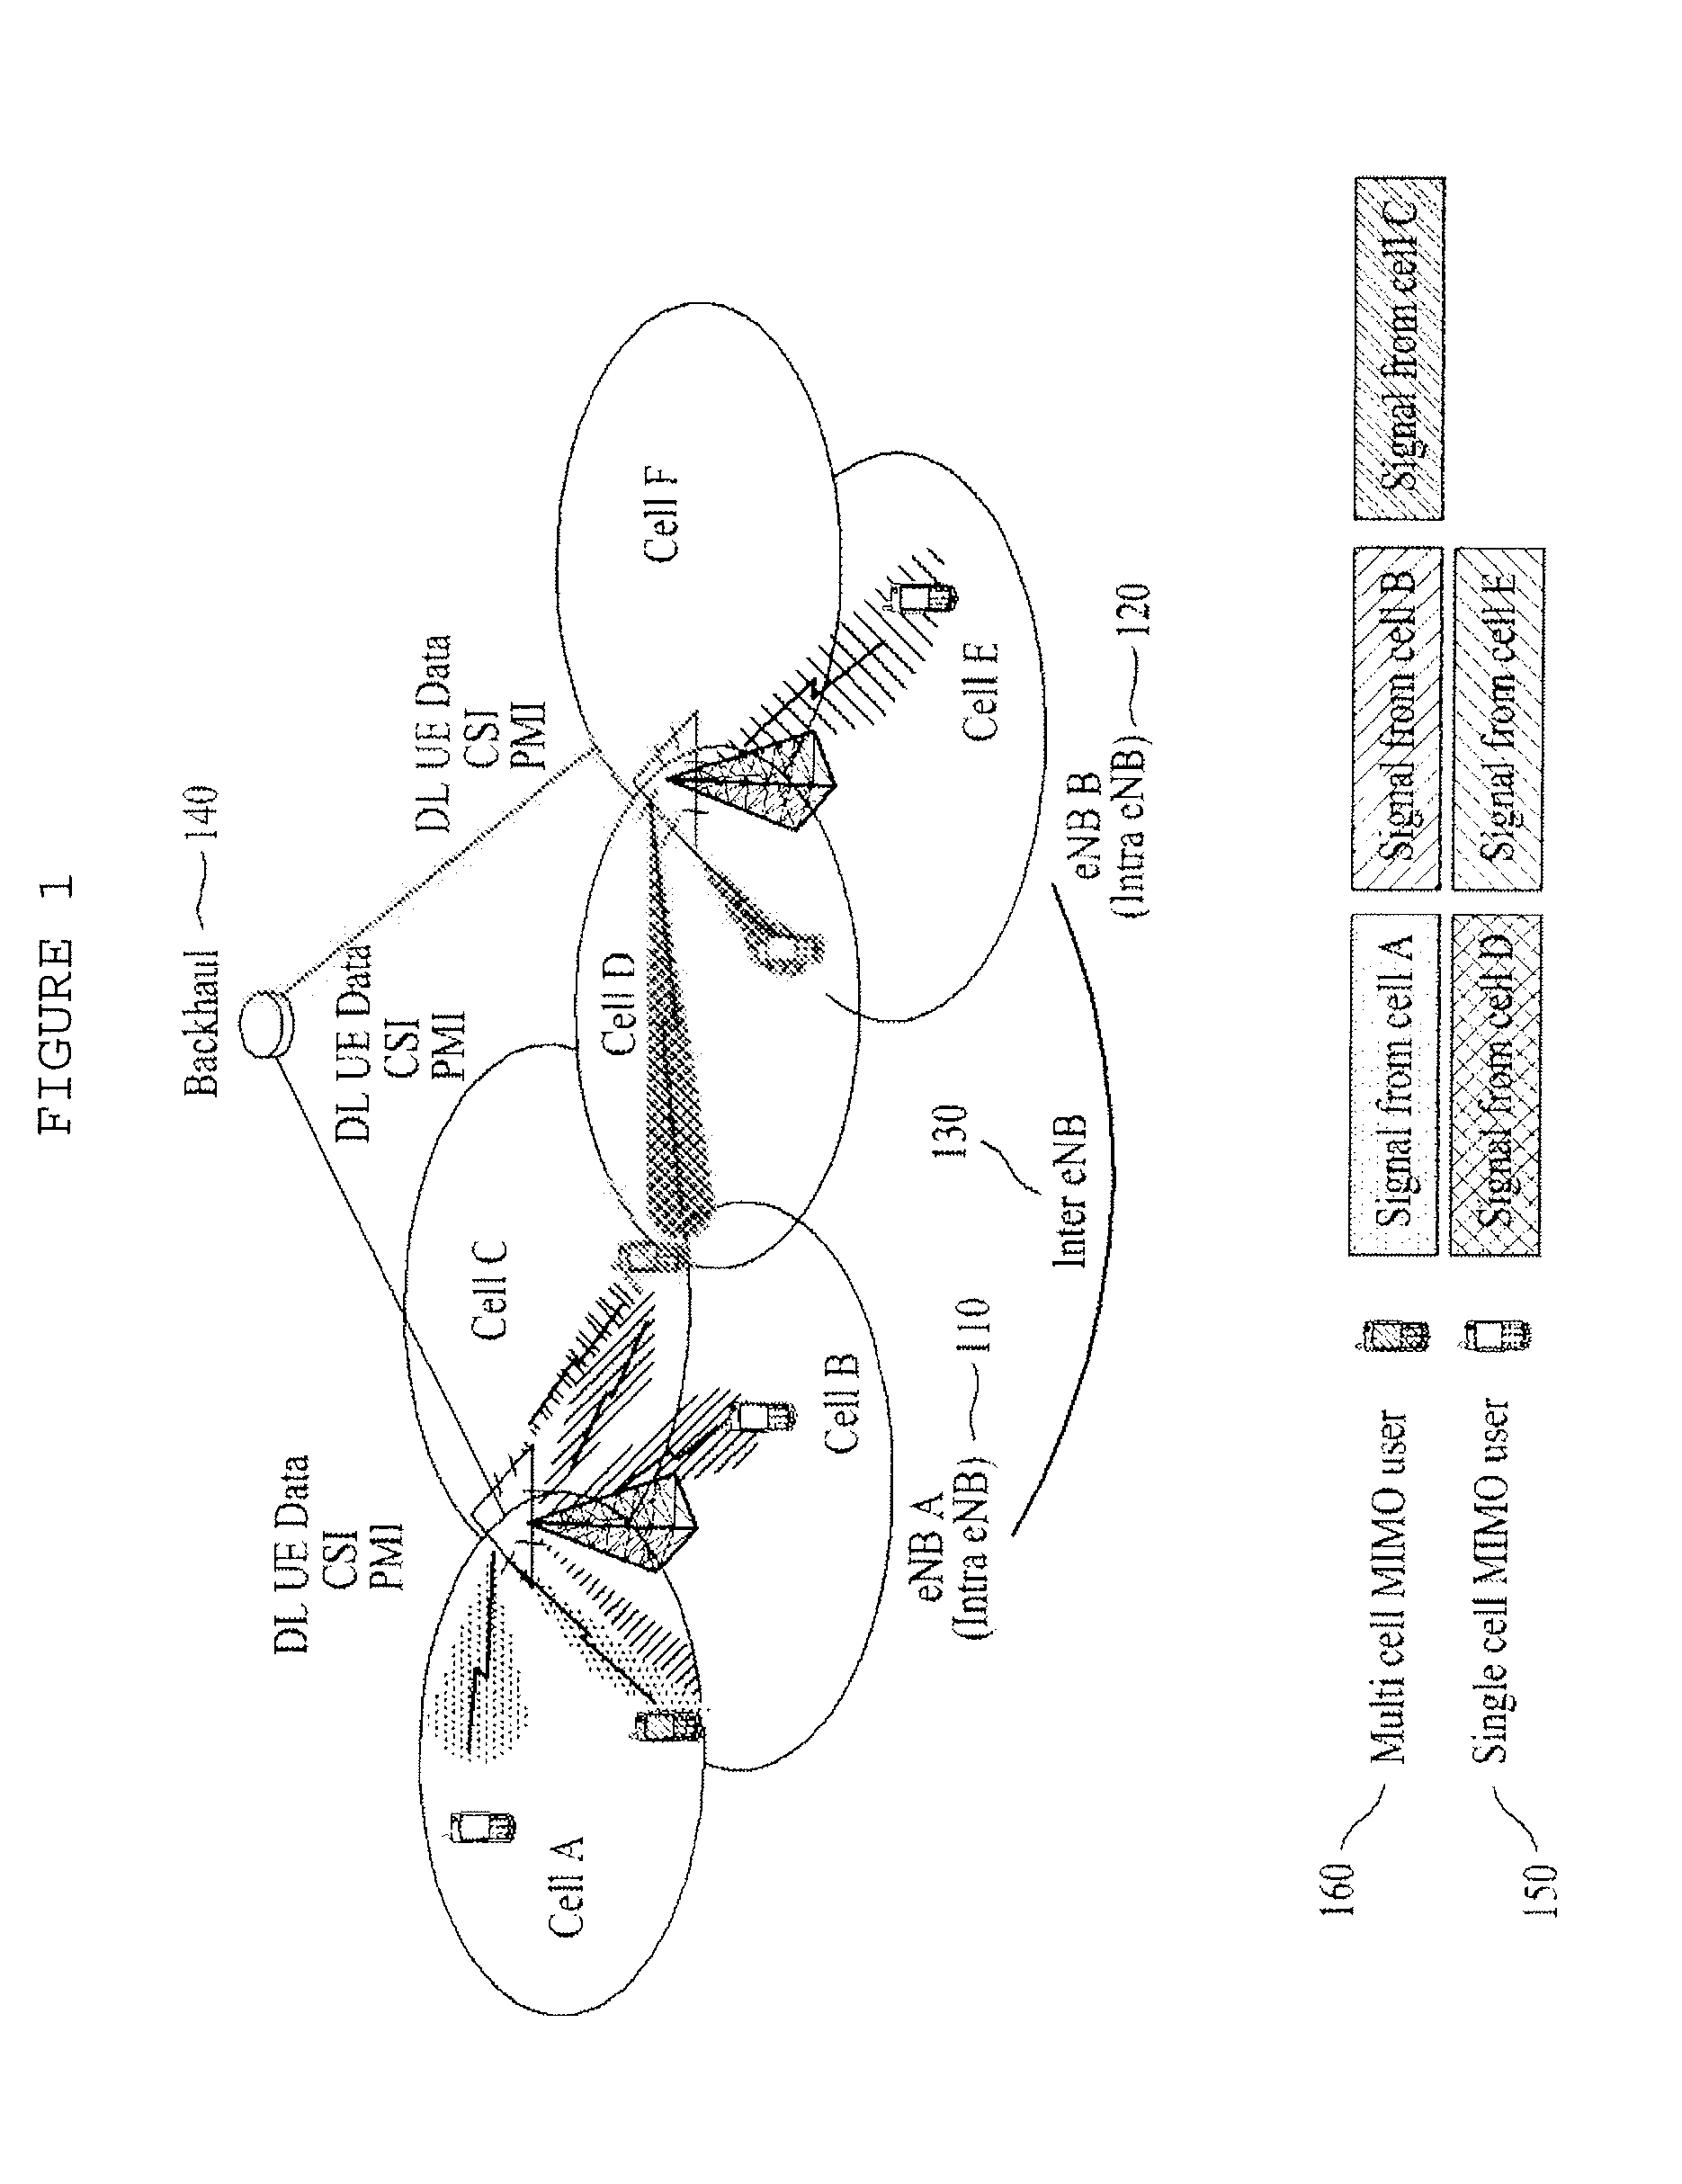 METHOD FOR PERFORMING CoMP OPERATION AND TRANSMITTING FEEDBACK INFORMATION IN A WIRELESS COMMUNICATION SYSTEM